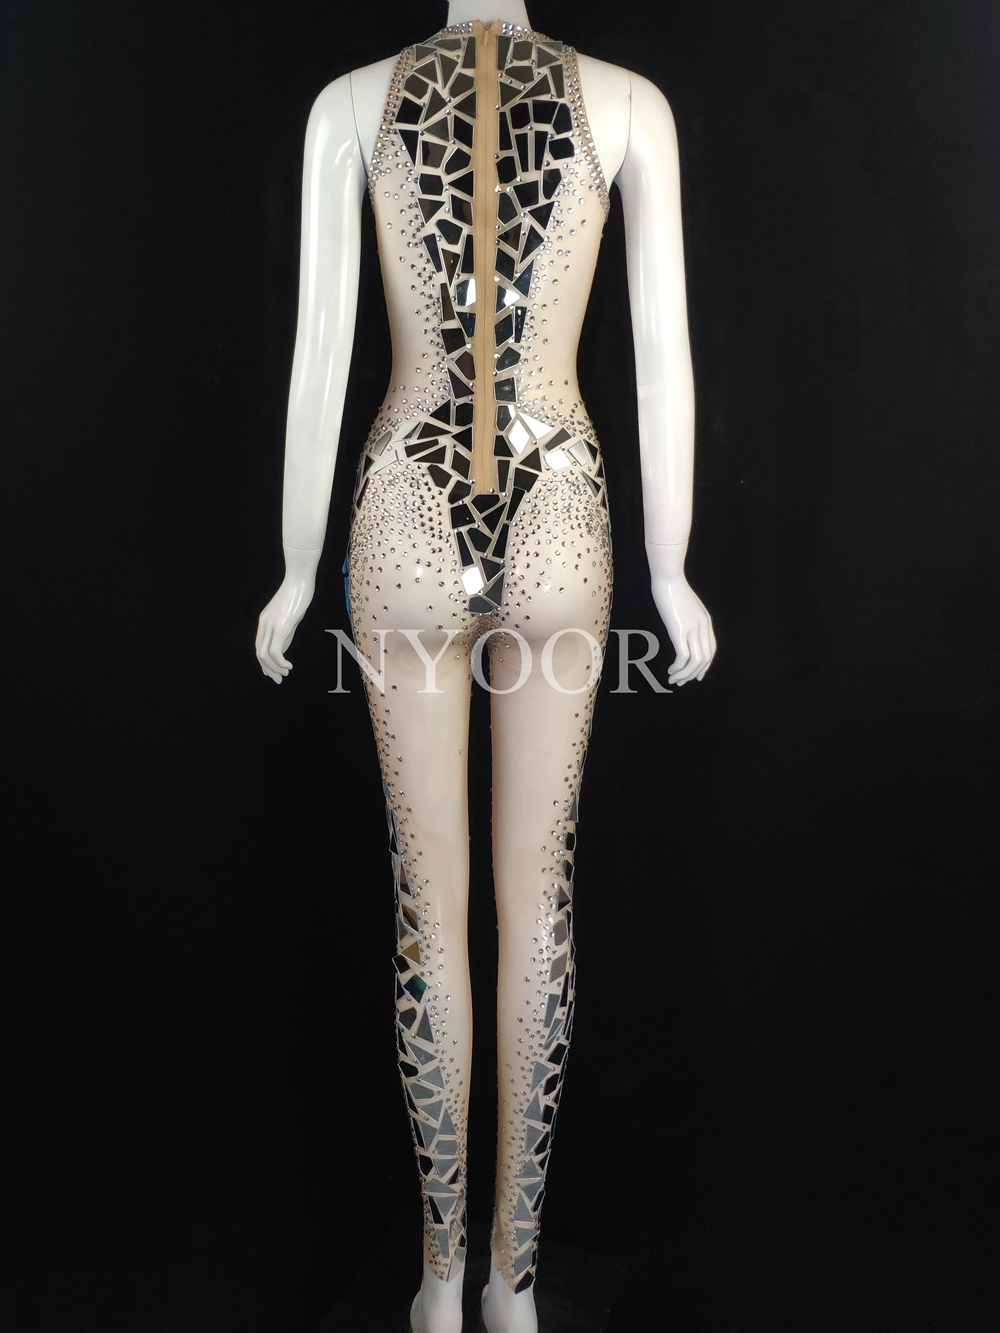 Sexy Sleeveless Transparent Rhinestones Mirrors Jumpsuit Singer Dancer Performance Stage Wear Birthday Celebrate Party Outfit